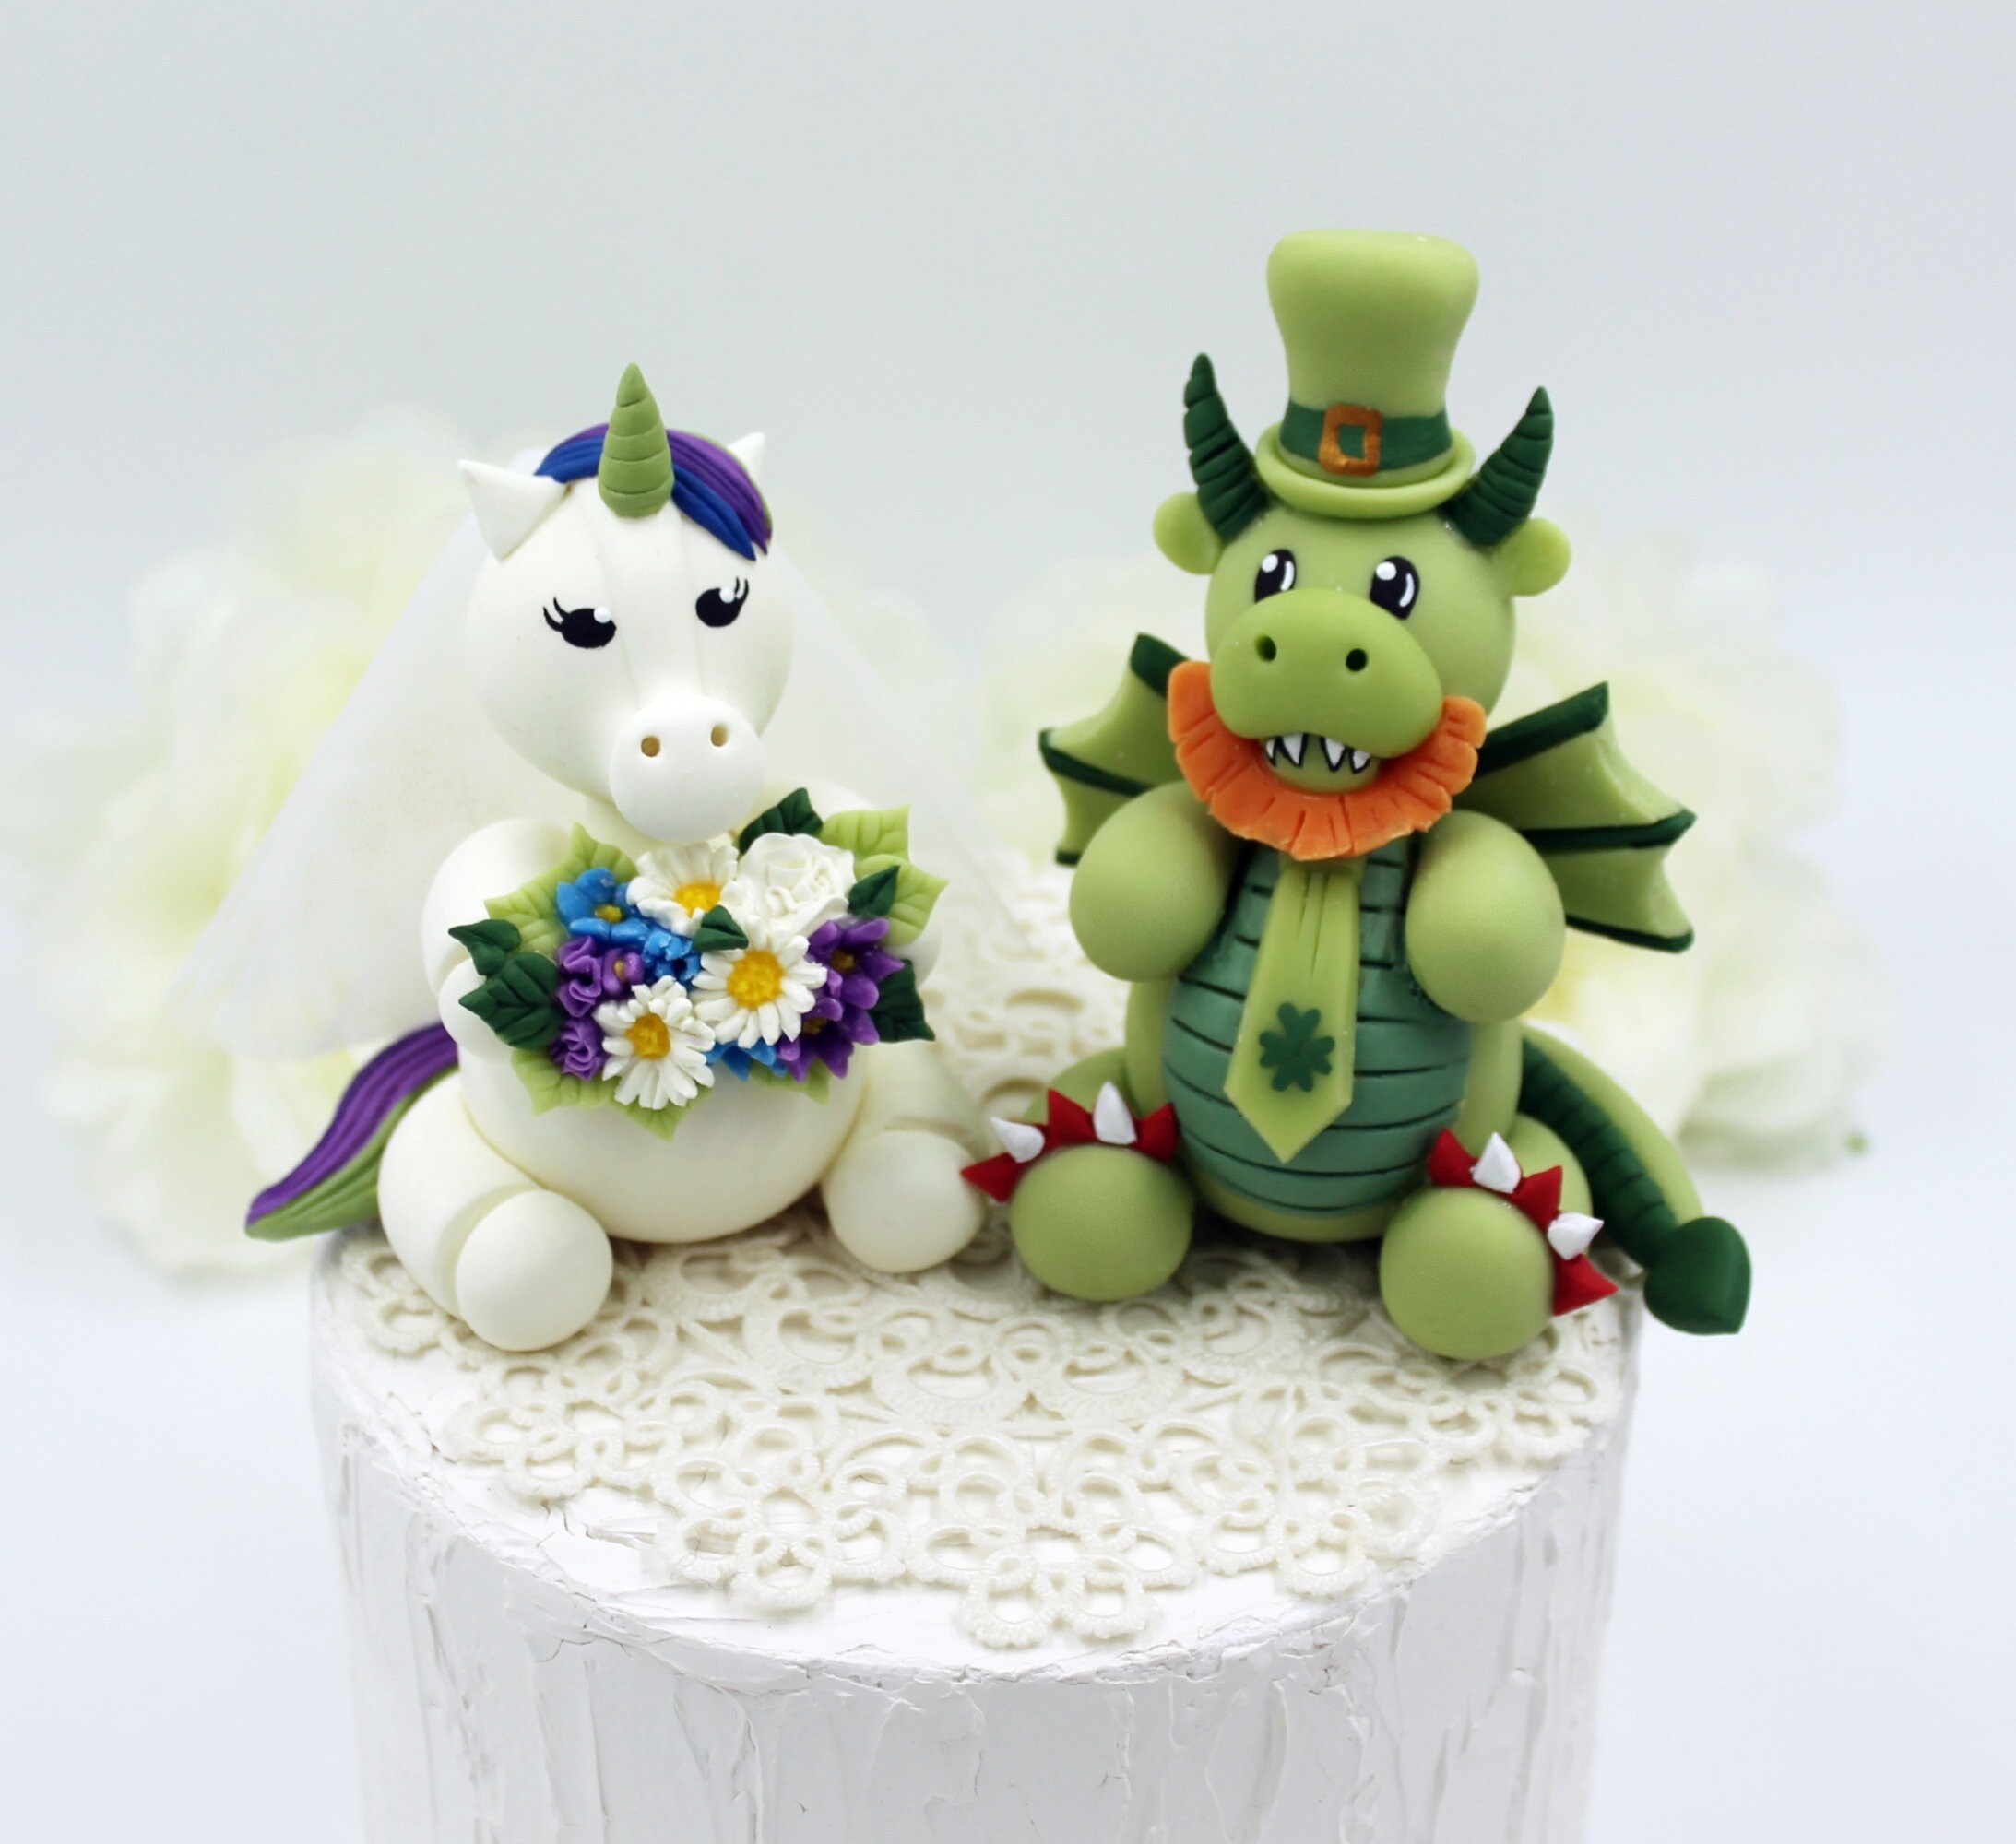 Unicorn and Horse Wedding Cake Topper - Archie McPhee & Co.